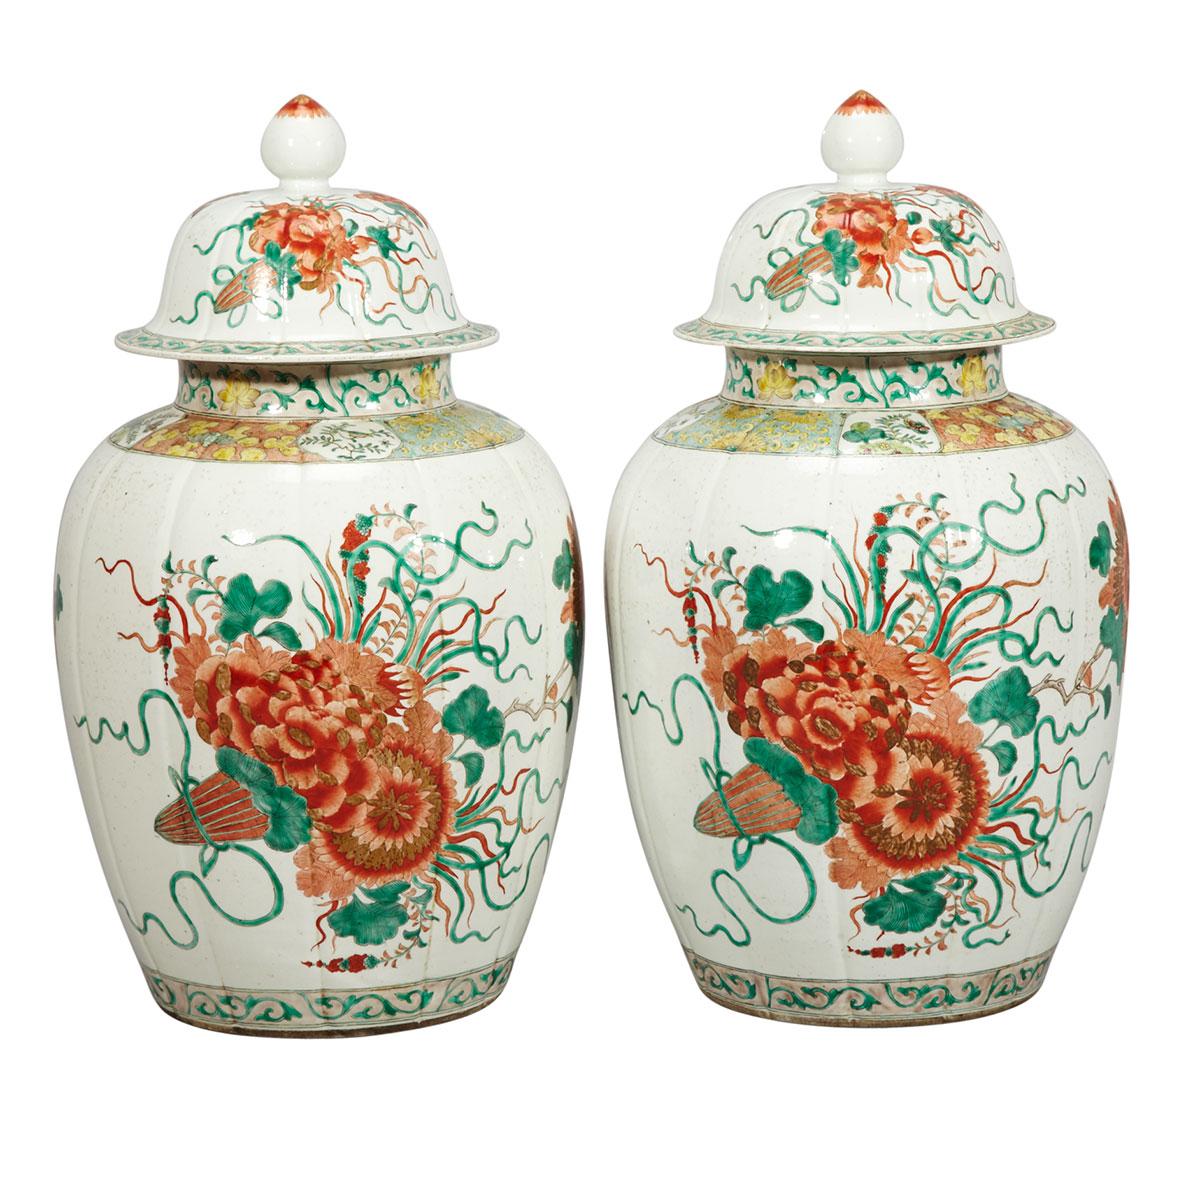 Pair of Famille Verte Melon Form Jars and Covers